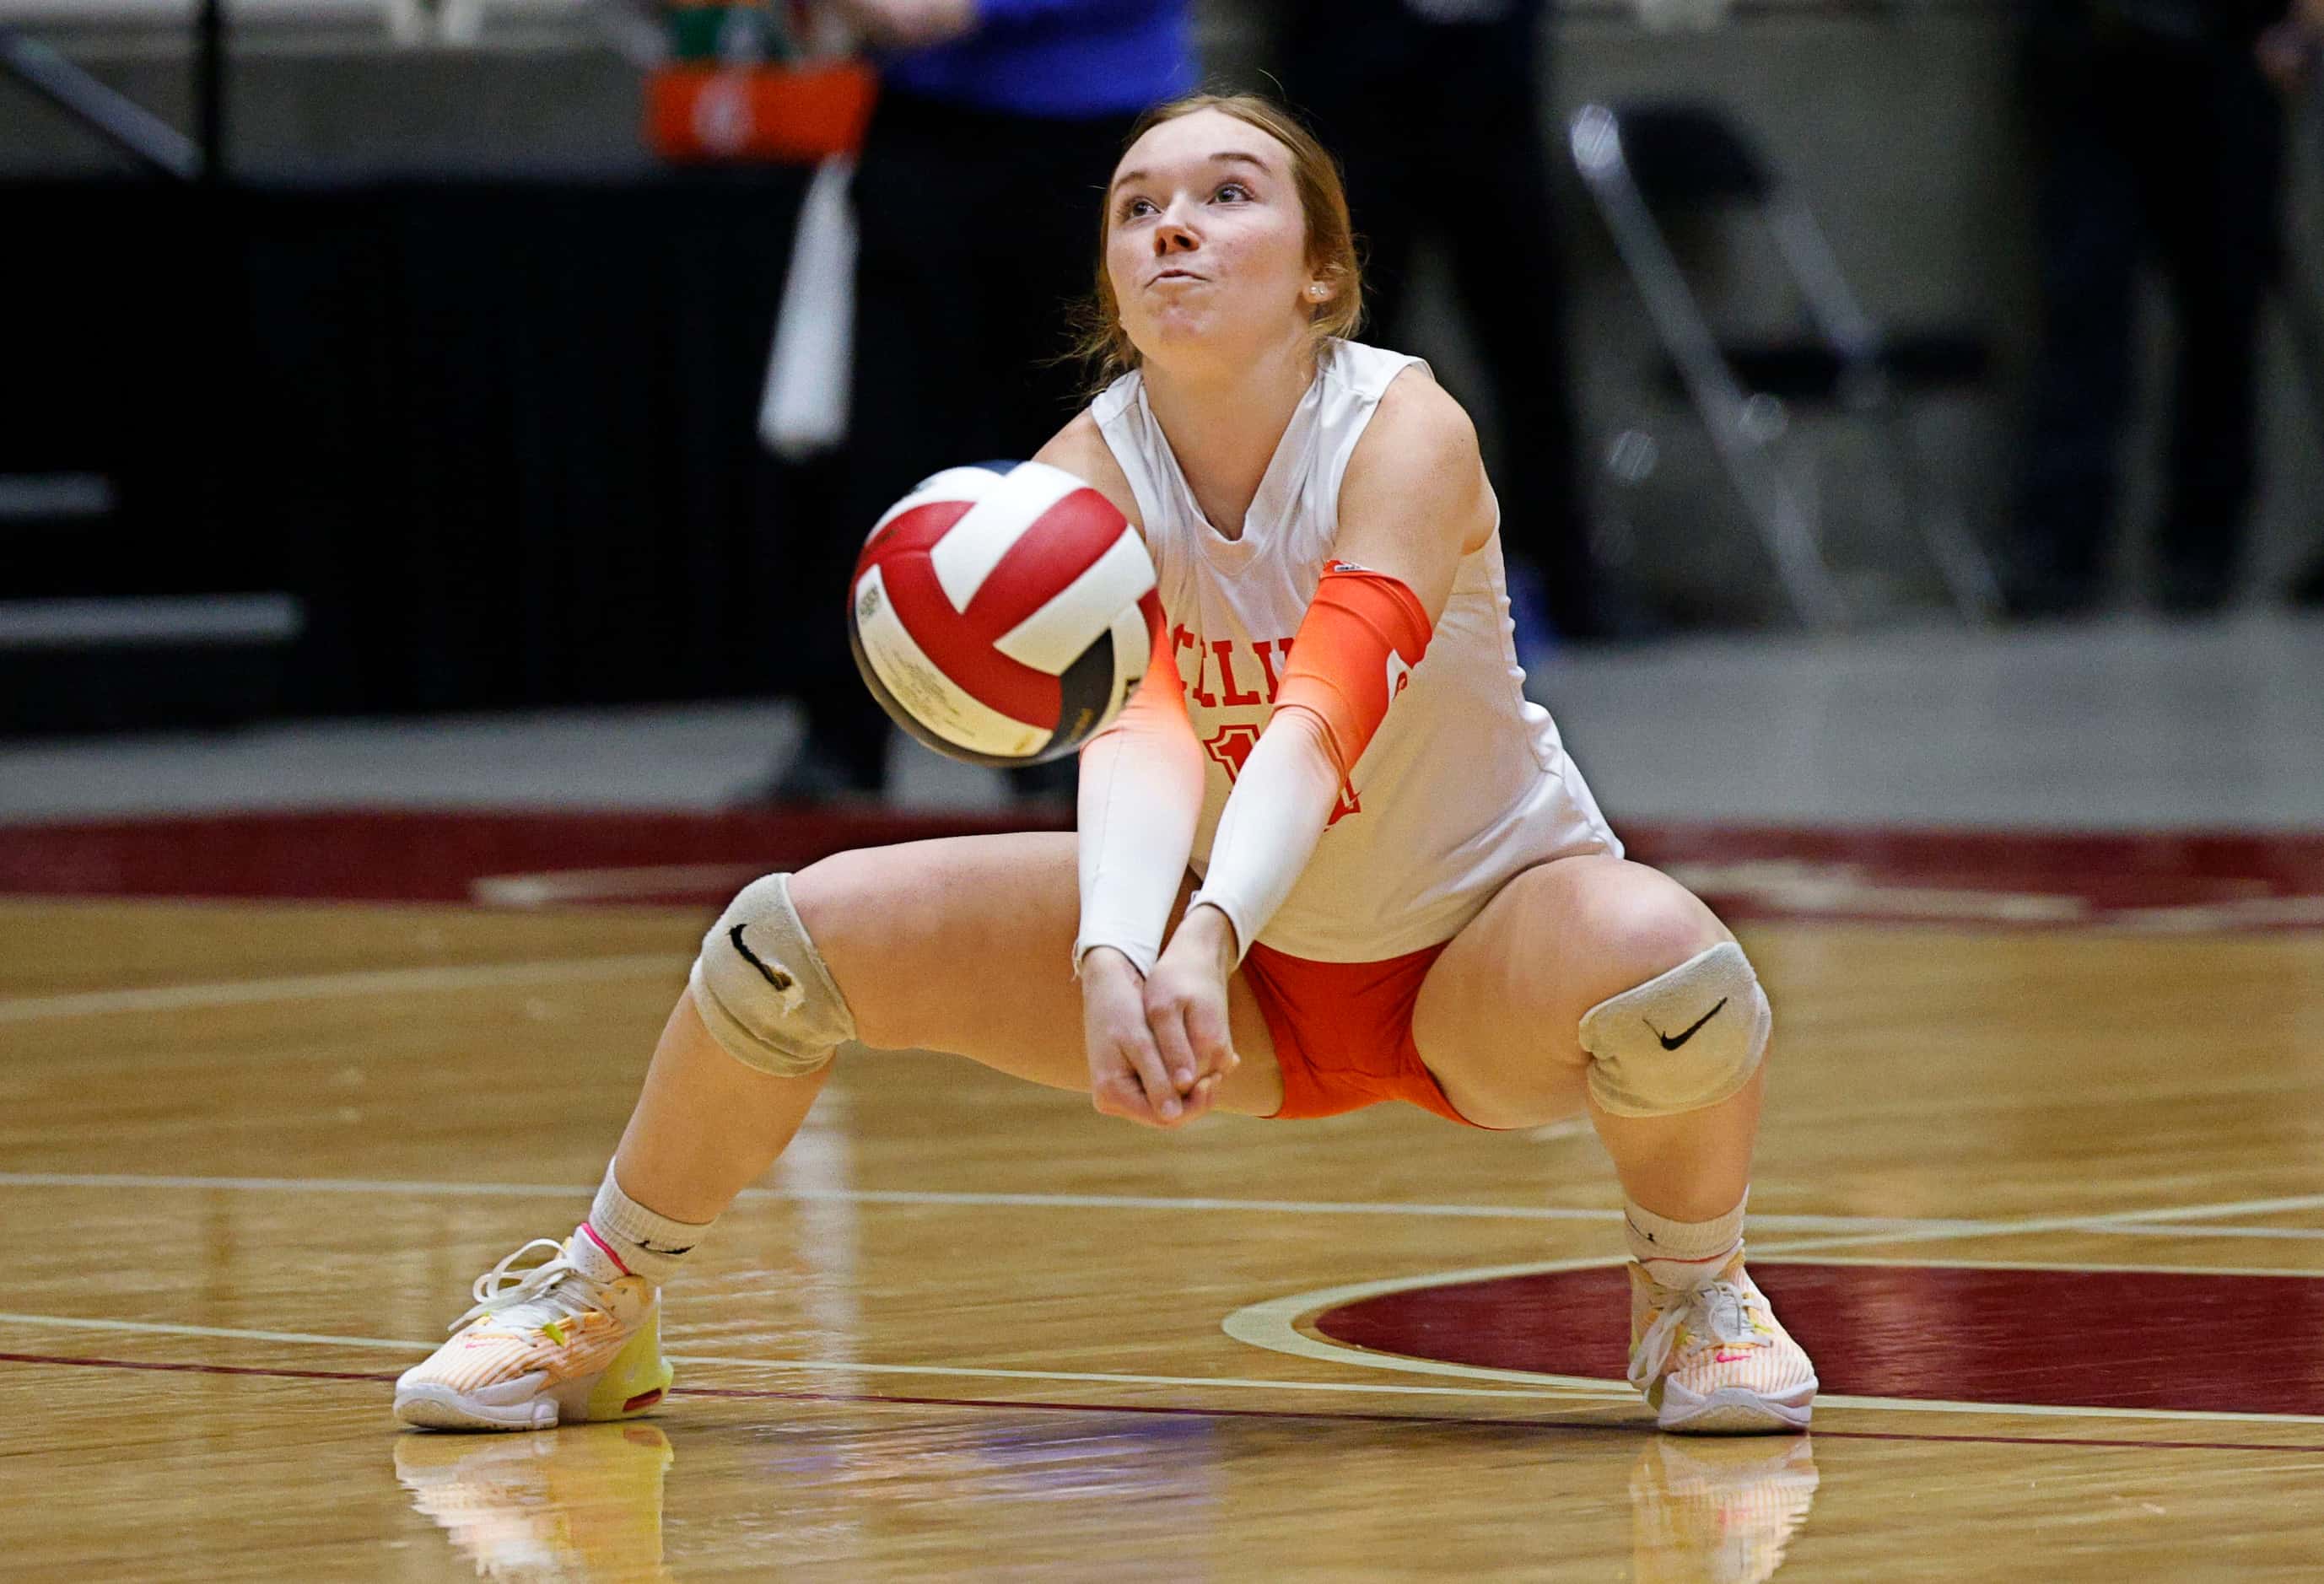 Celina's Kinsey Murray digs the ball against Comal Davenport in the first set during a UIL...